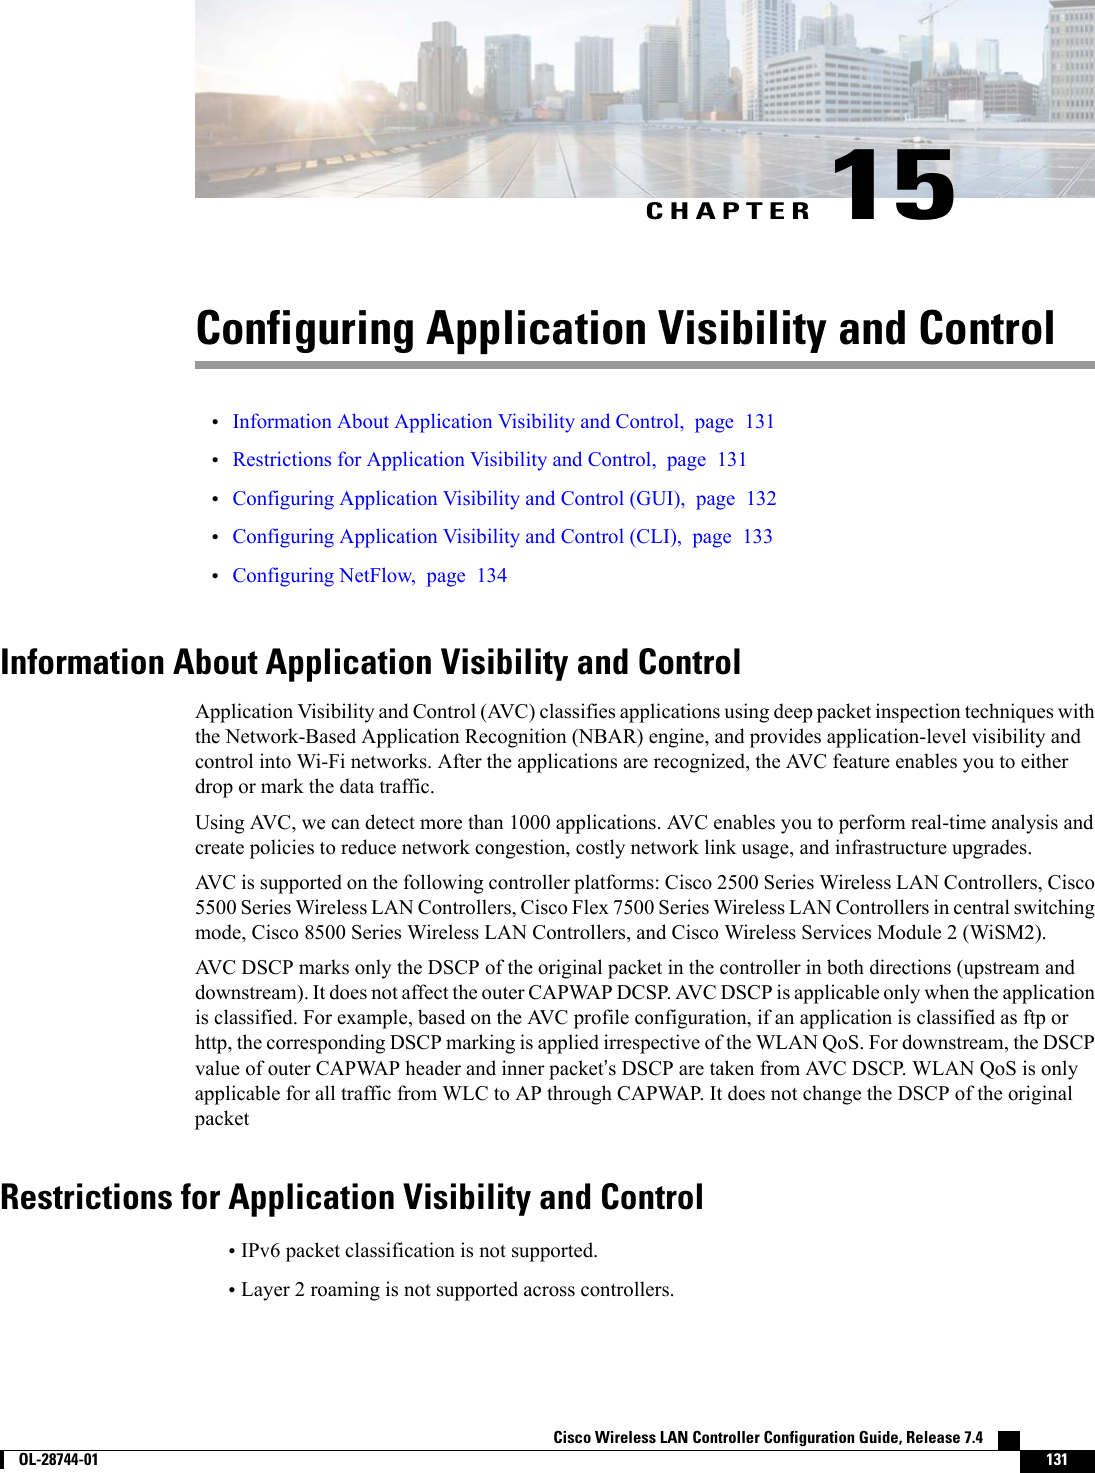 CHAPTER 15Configuring Application Visibility and Control•Information About Application Visibility and Control, page 131•Restrictions for Application Visibility and Control, page 131•Configuring Application Visibility and Control (GUI), page 132•Configuring Application Visibility and Control (CLI), page 133•Configuring NetFlow, page 134Information About Application Visibility and ControlApplication Visibility and Control (AVC) classifies applications using deep packet inspection techniques withthe Network-Based Application Recognition (NBAR) engine, and provides application-level visibility andcontrol into Wi-Fi networks. After the applications are recognized, the AVC feature enables you to eitherdrop or mark the data traffic.Using AVC, we can detect more than 1000 applications. AVC enables you to perform real-time analysis andcreate policies to reduce network congestion, costly network link usage, and infrastructure upgrades.AVC is supported on the following controller platforms: Cisco 2500 Series Wireless LAN Controllers, Cisco5500 Series Wireless LAN Controllers, Cisco Flex 7500 Series Wireless LAN Controllers in central switchingmode, Cisco 8500 Series Wireless LAN Controllers, and Cisco Wireless Services Module 2 (WiSM2).AVC DSCP marks only the DSCP of the original packet in the controller in both directions (upstream anddownstream). It does not affect the outer CAPWAP DCSP. AVC DSCP is applicable only when the applicationis classified. For example, based on the AVC profile configuration, if an application is classified as ftp orhttp, the corresponding DSCP marking is applied irrespective of the WLAN QoS. For downstream, the DSCPvalue of outer CAPWAP header and inner packet’s DSCP are taken from AVC DSCP. WLAN QoS is onlyapplicable for all traffic from WLC to AP through CAPWAP. It does not change the DSCP of the originalpacketRestrictions for Application Visibility and Control•IPv6 packet classification is not supported.•Layer 2 roaming is not supported across controllers.Cisco Wireless LAN Controller Configuration Guide, Release 7.4        OL-28744-01 131